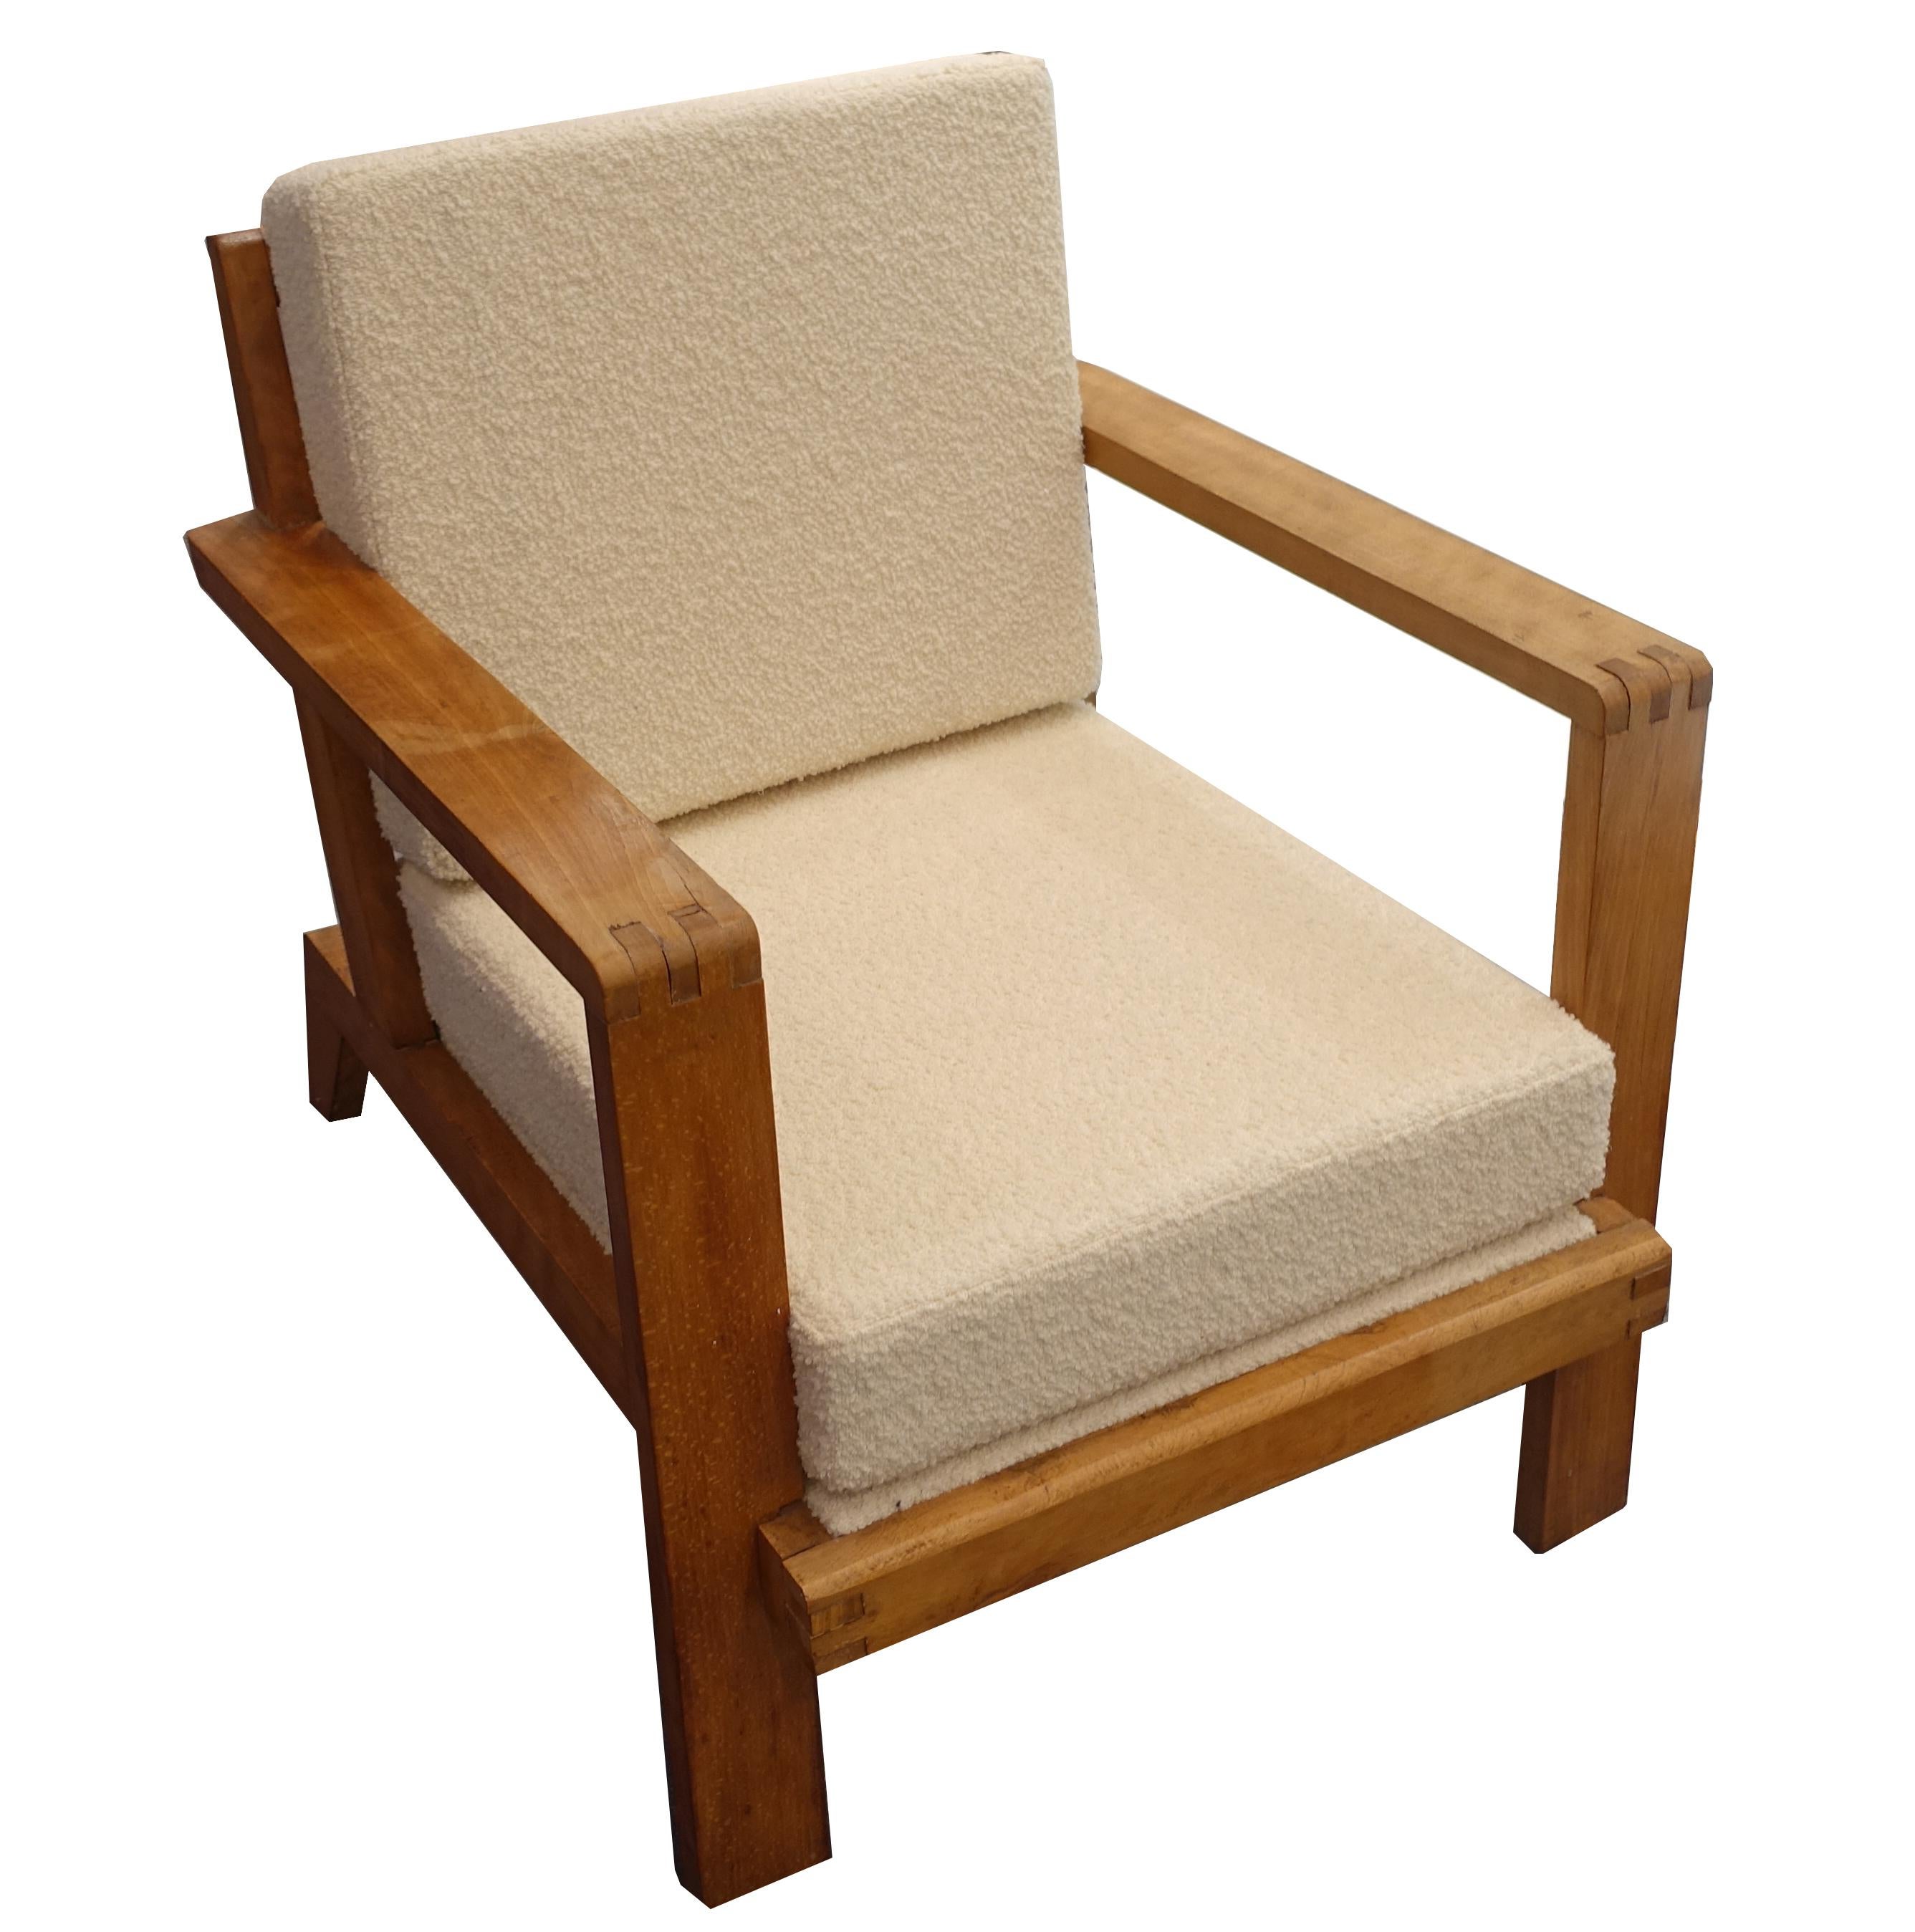 French Vintage, rare René Gabriel Armchair from Paris, France, circa 1940s with grid back and new cream bouclé upholstery.